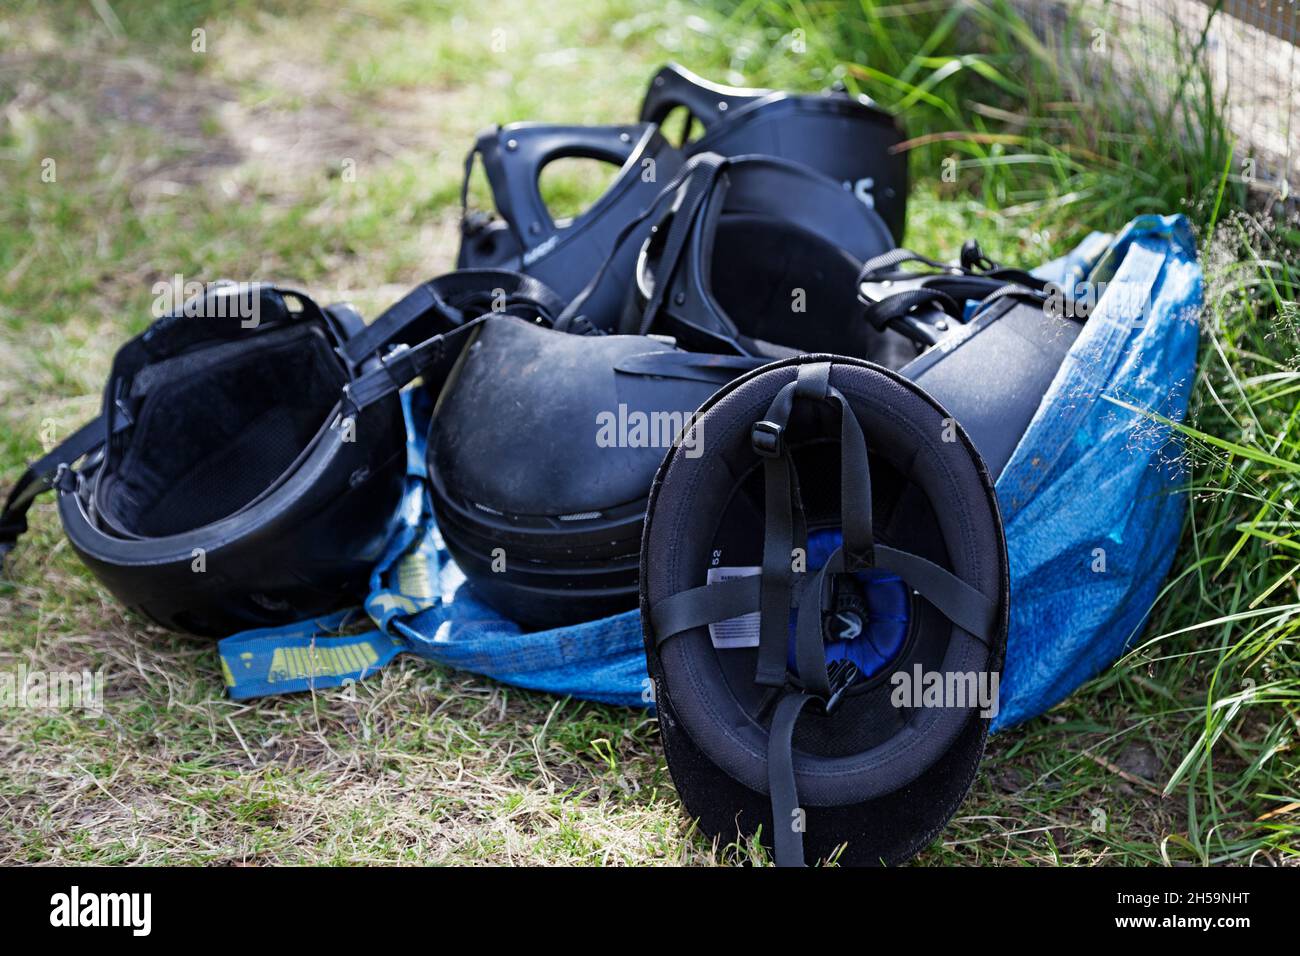 Umea, Norrland Sweden - August 21, 2021: riding helmets and other things needed Stock Photo